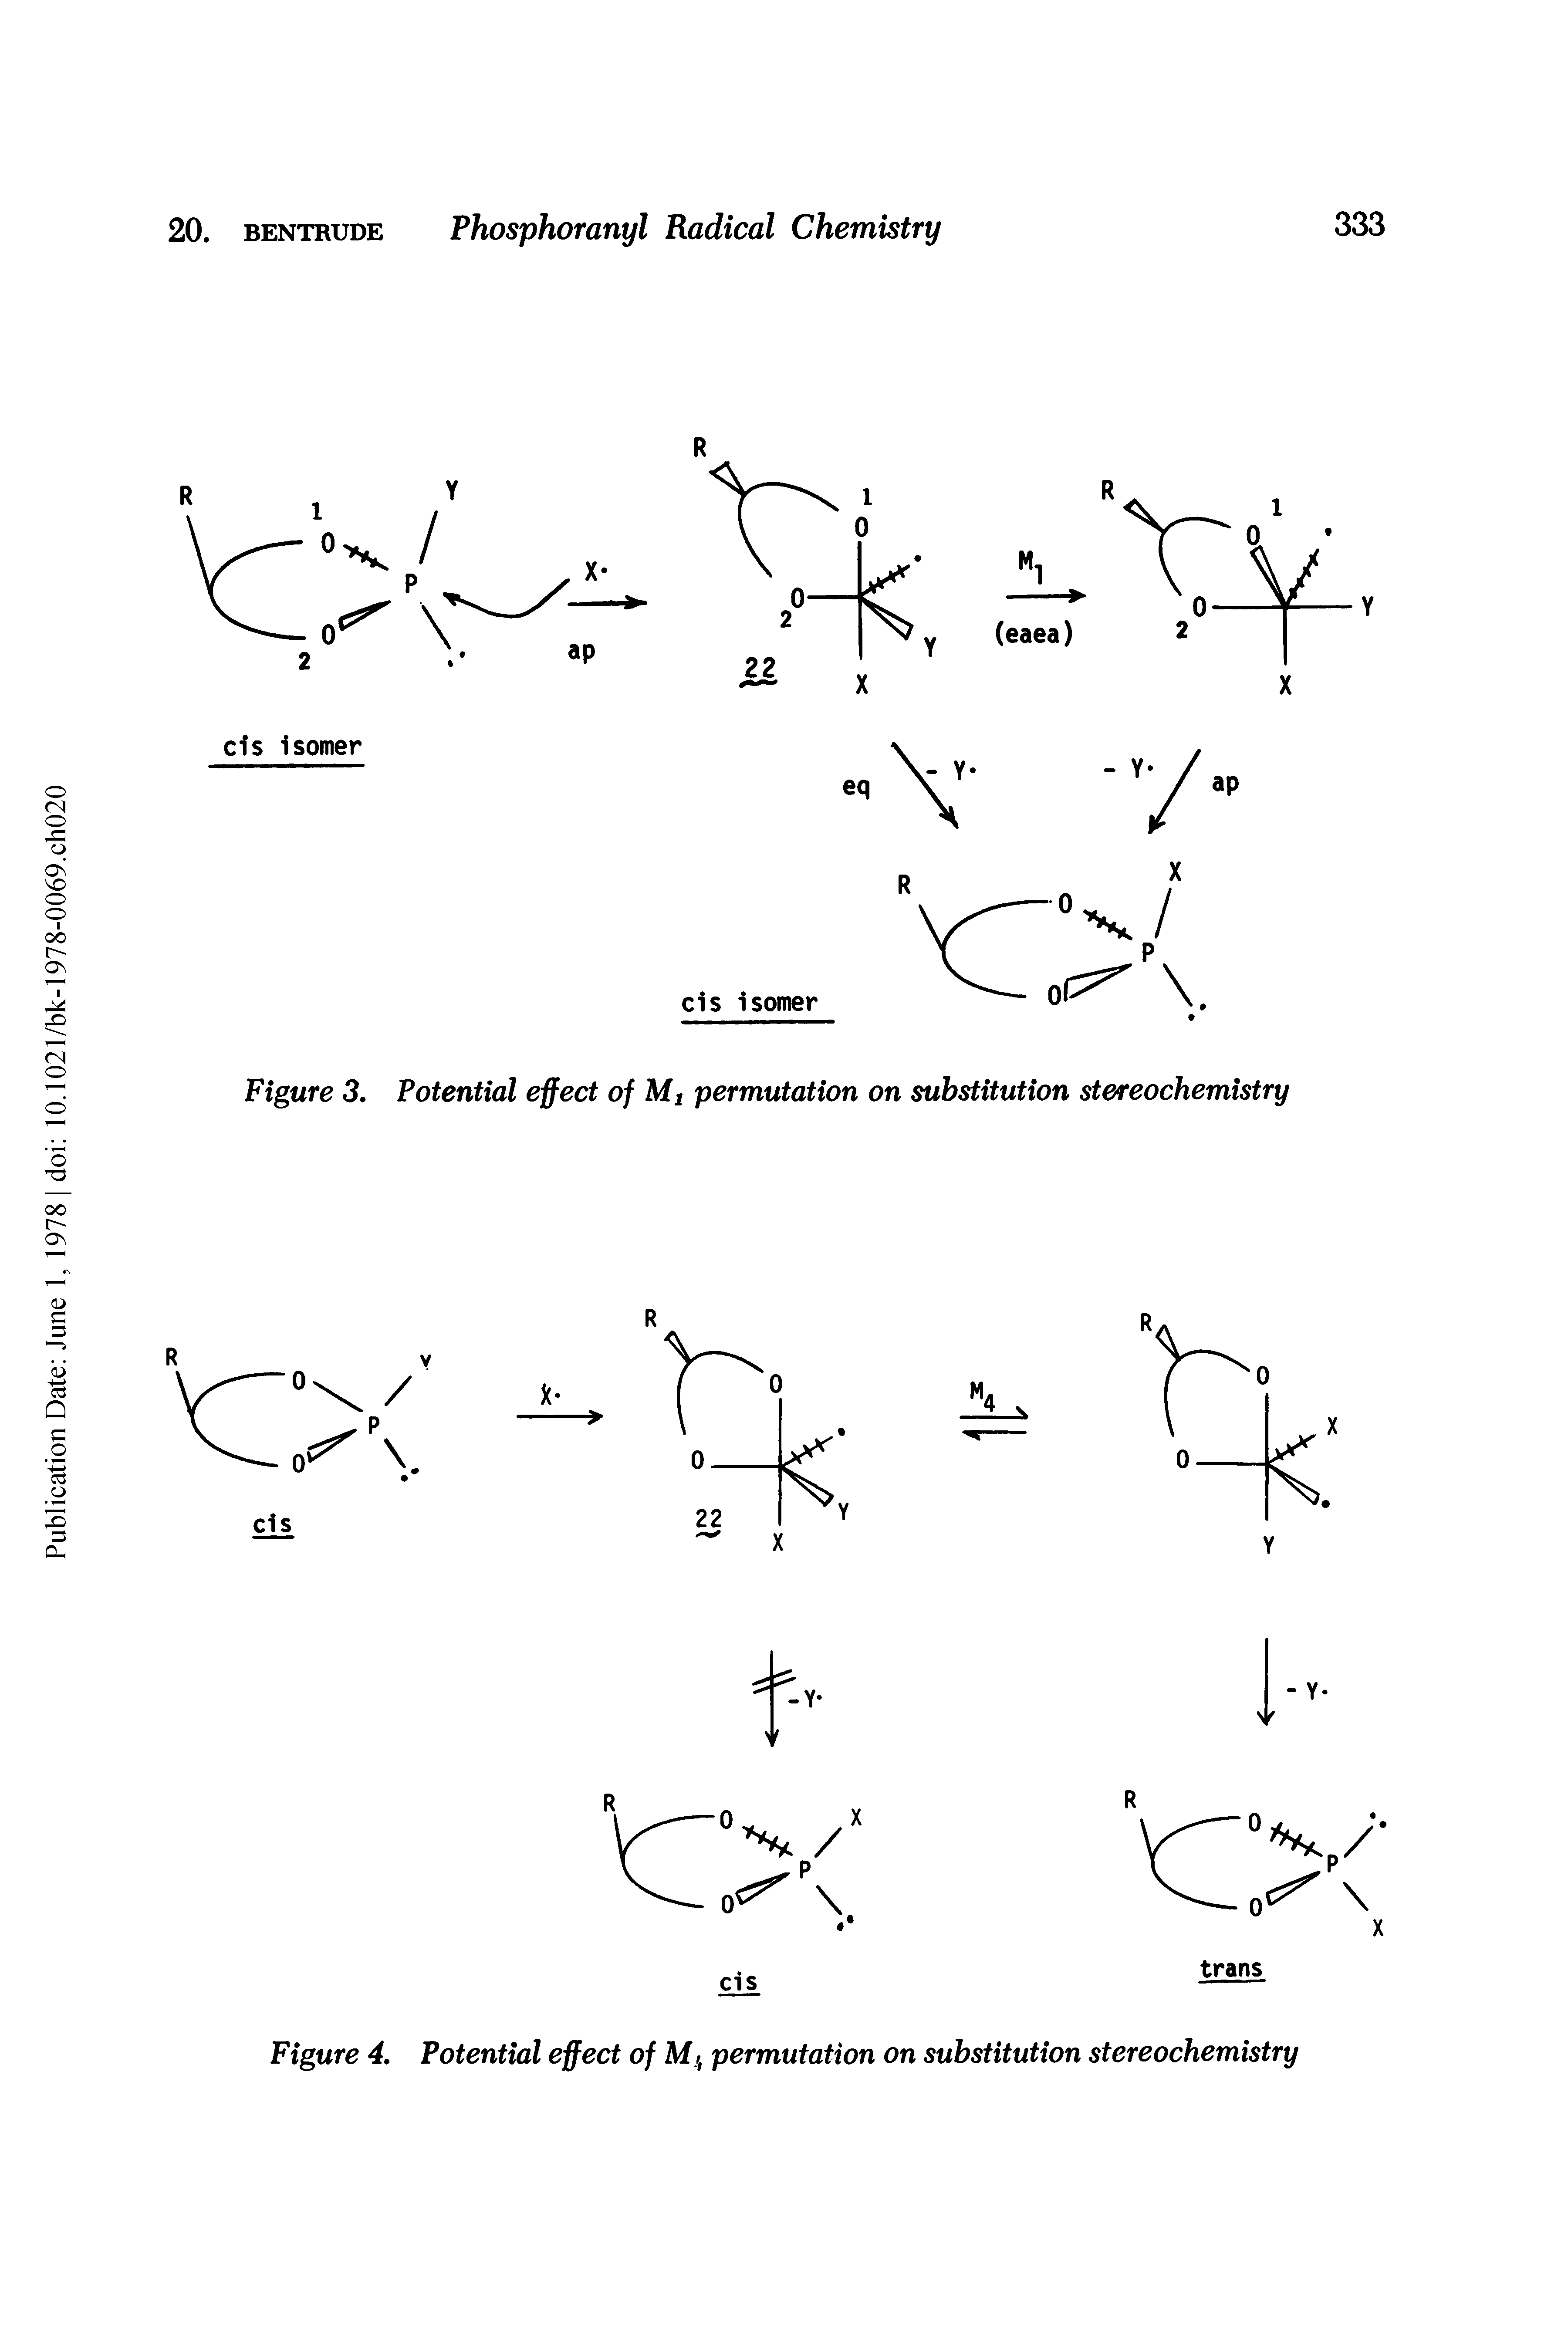 Figure 3, Potential effect of Mi permutation on substitution stereochemistry...